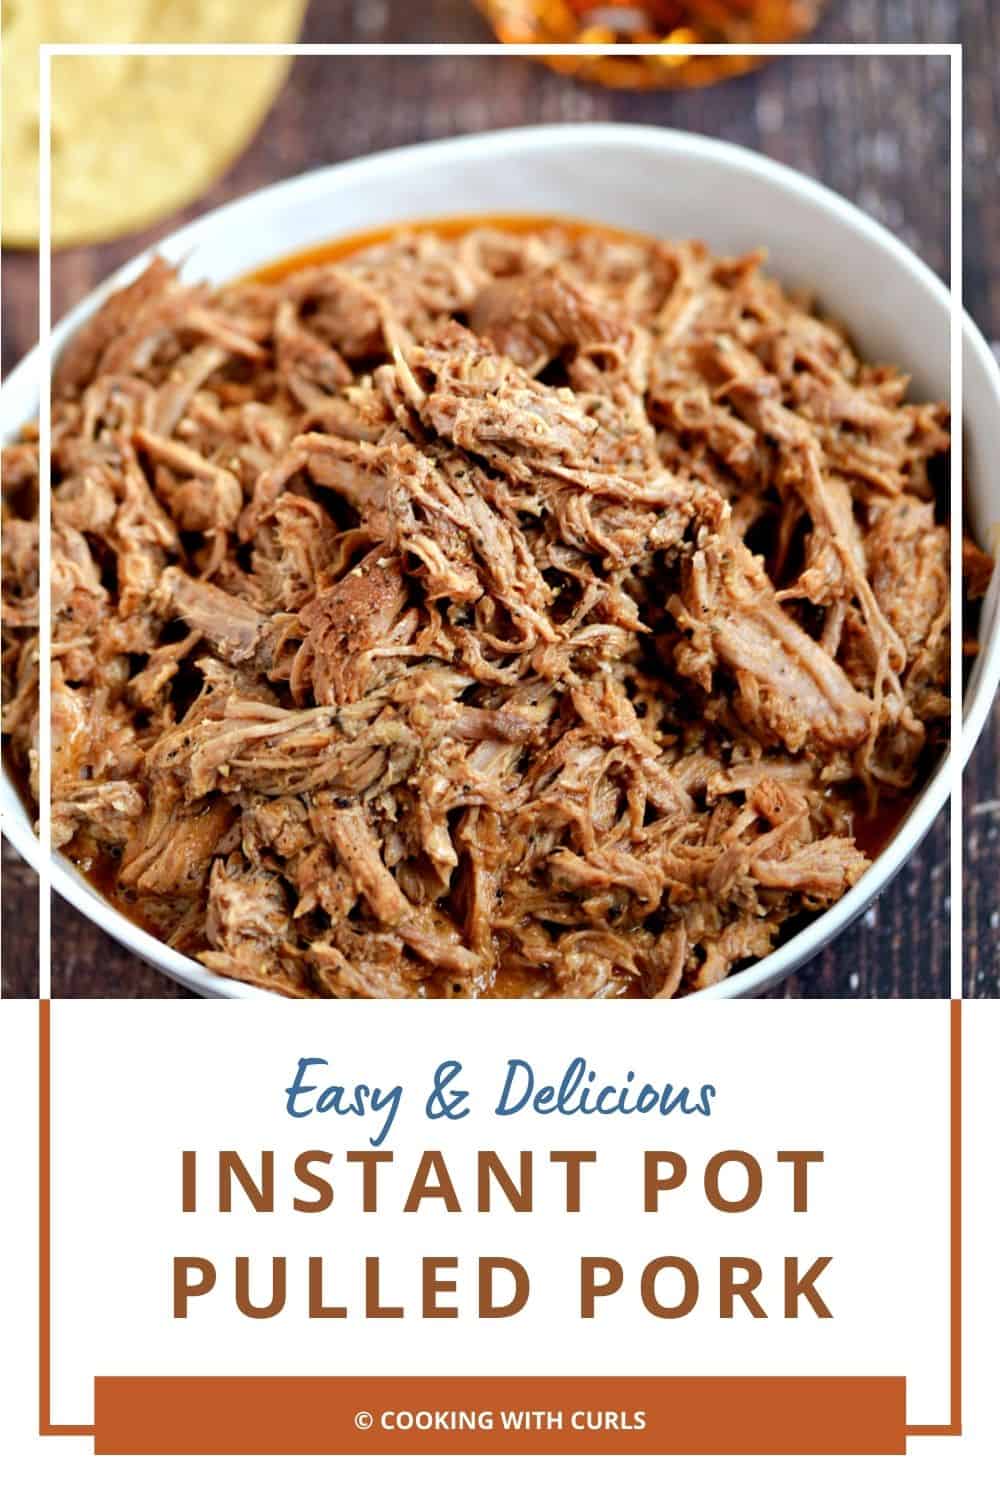 Instant Pot Pulled Pork - Cooking with Curls